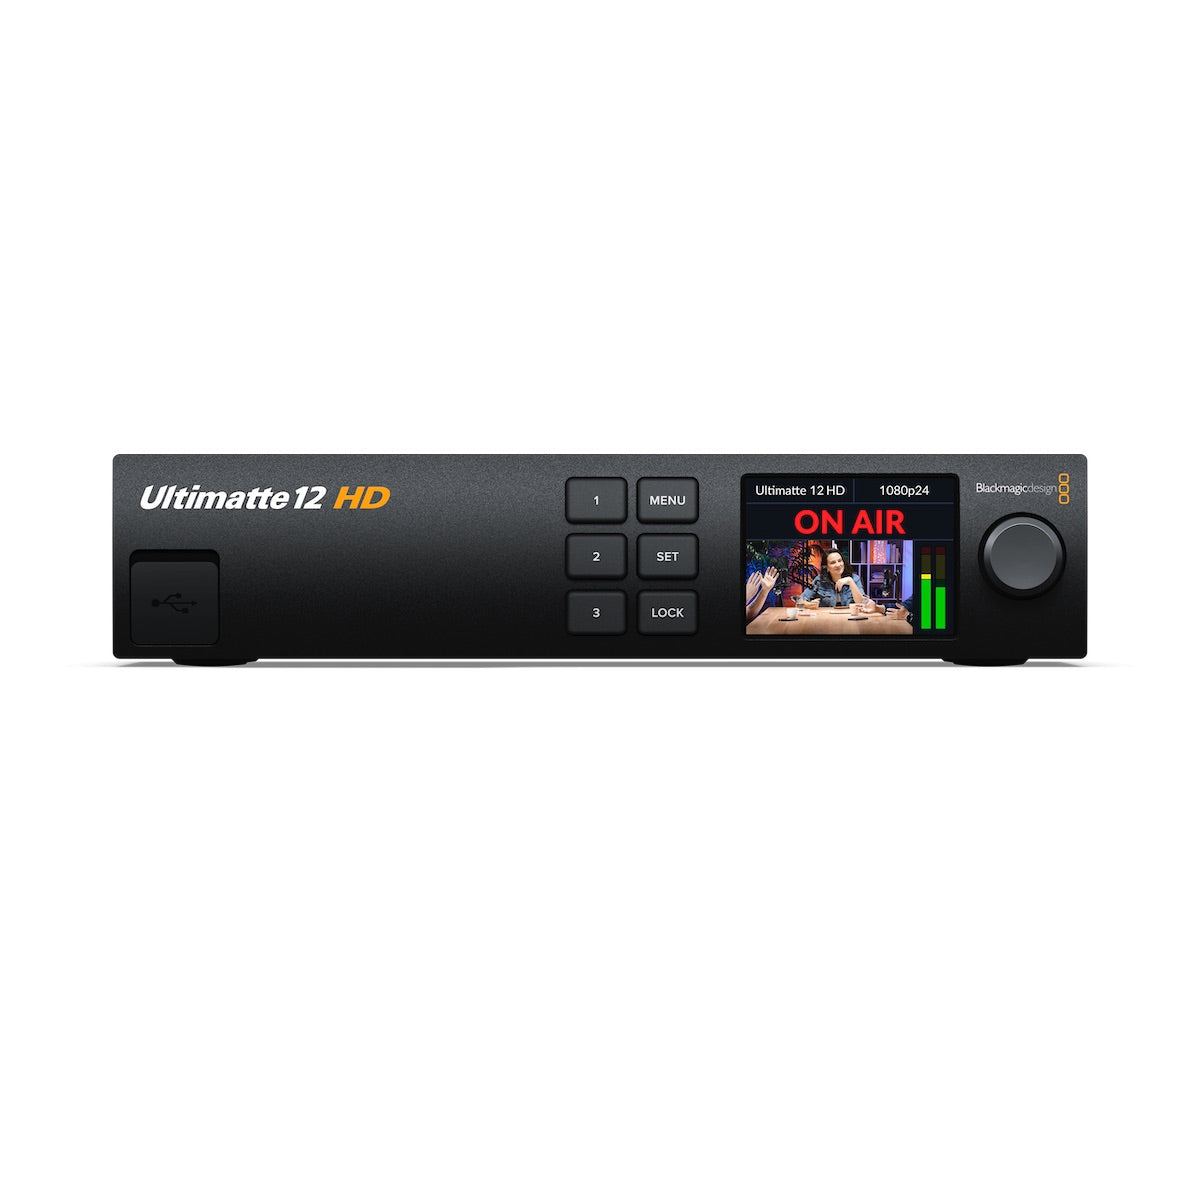 Blackmagic Ultimatte 12 HD - Real-time Compositing Processor Keyer, front